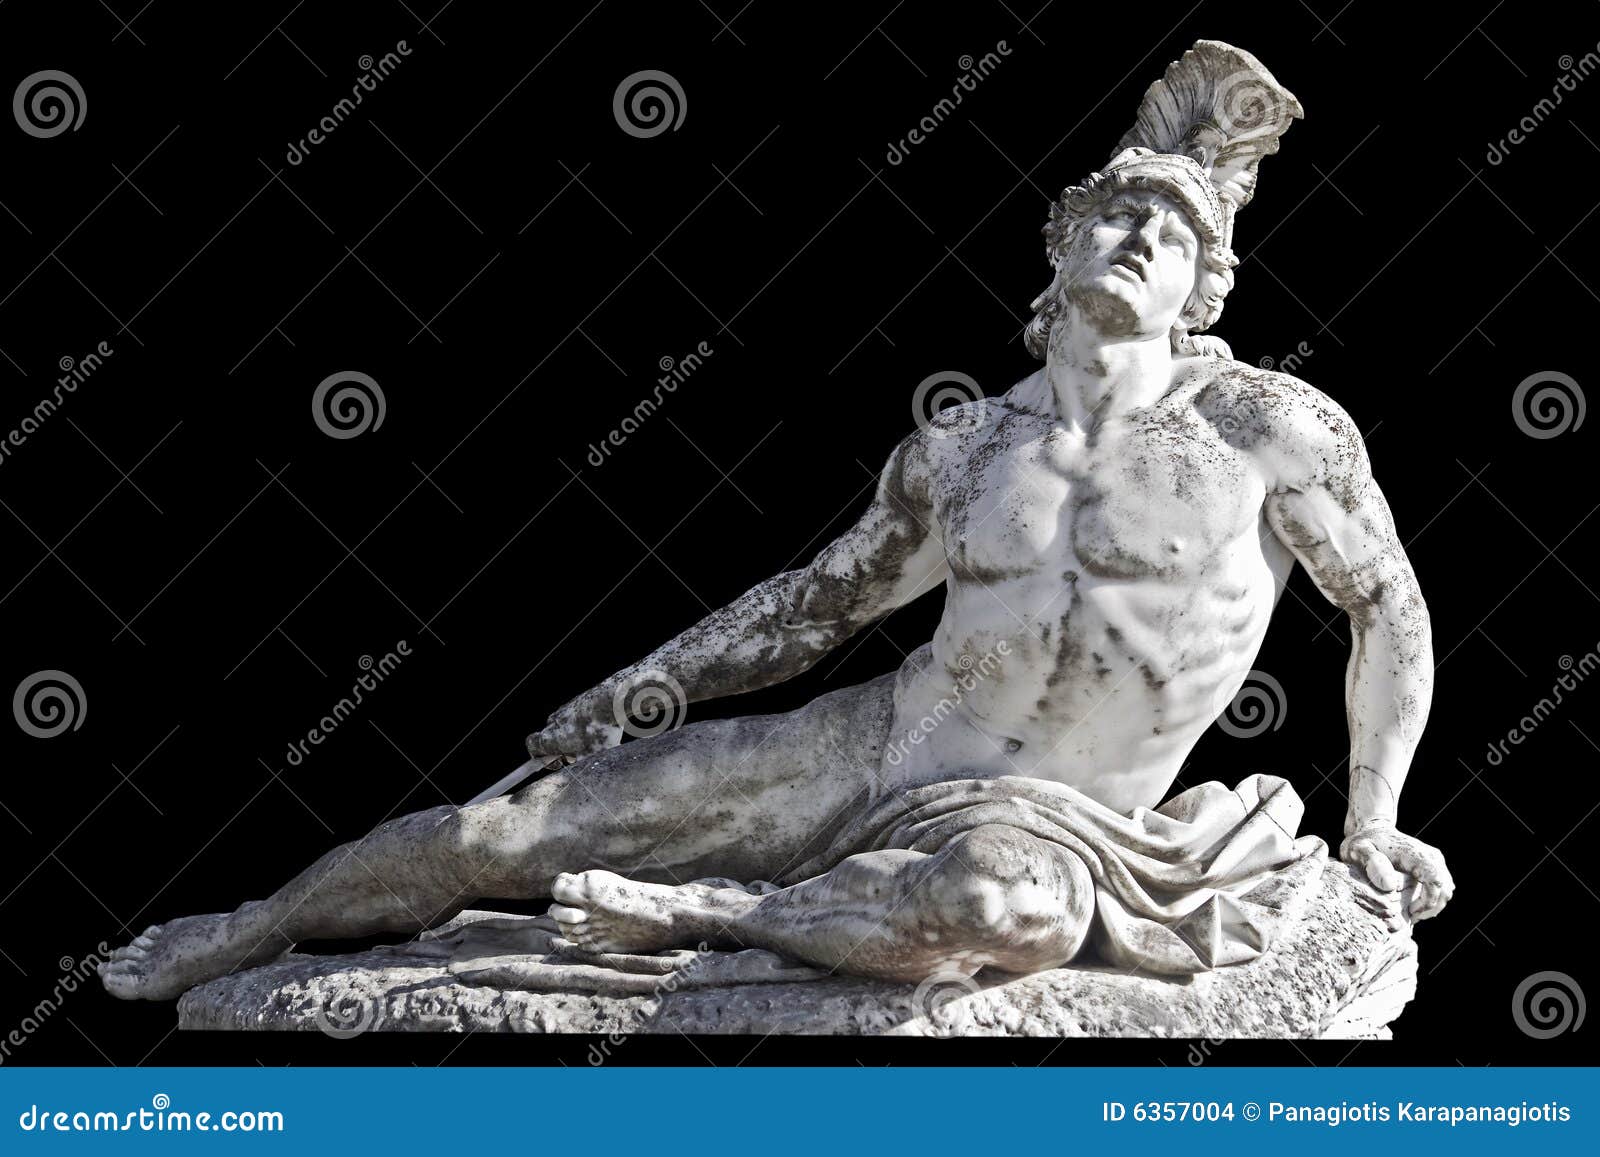 Achilles mourning the death of Patroclus. In Greek mythology, Achilles was  a Greek hero of the Trojan War, the central character and the greatest  warrior of Homer's Iliad. Legends state that Achilles